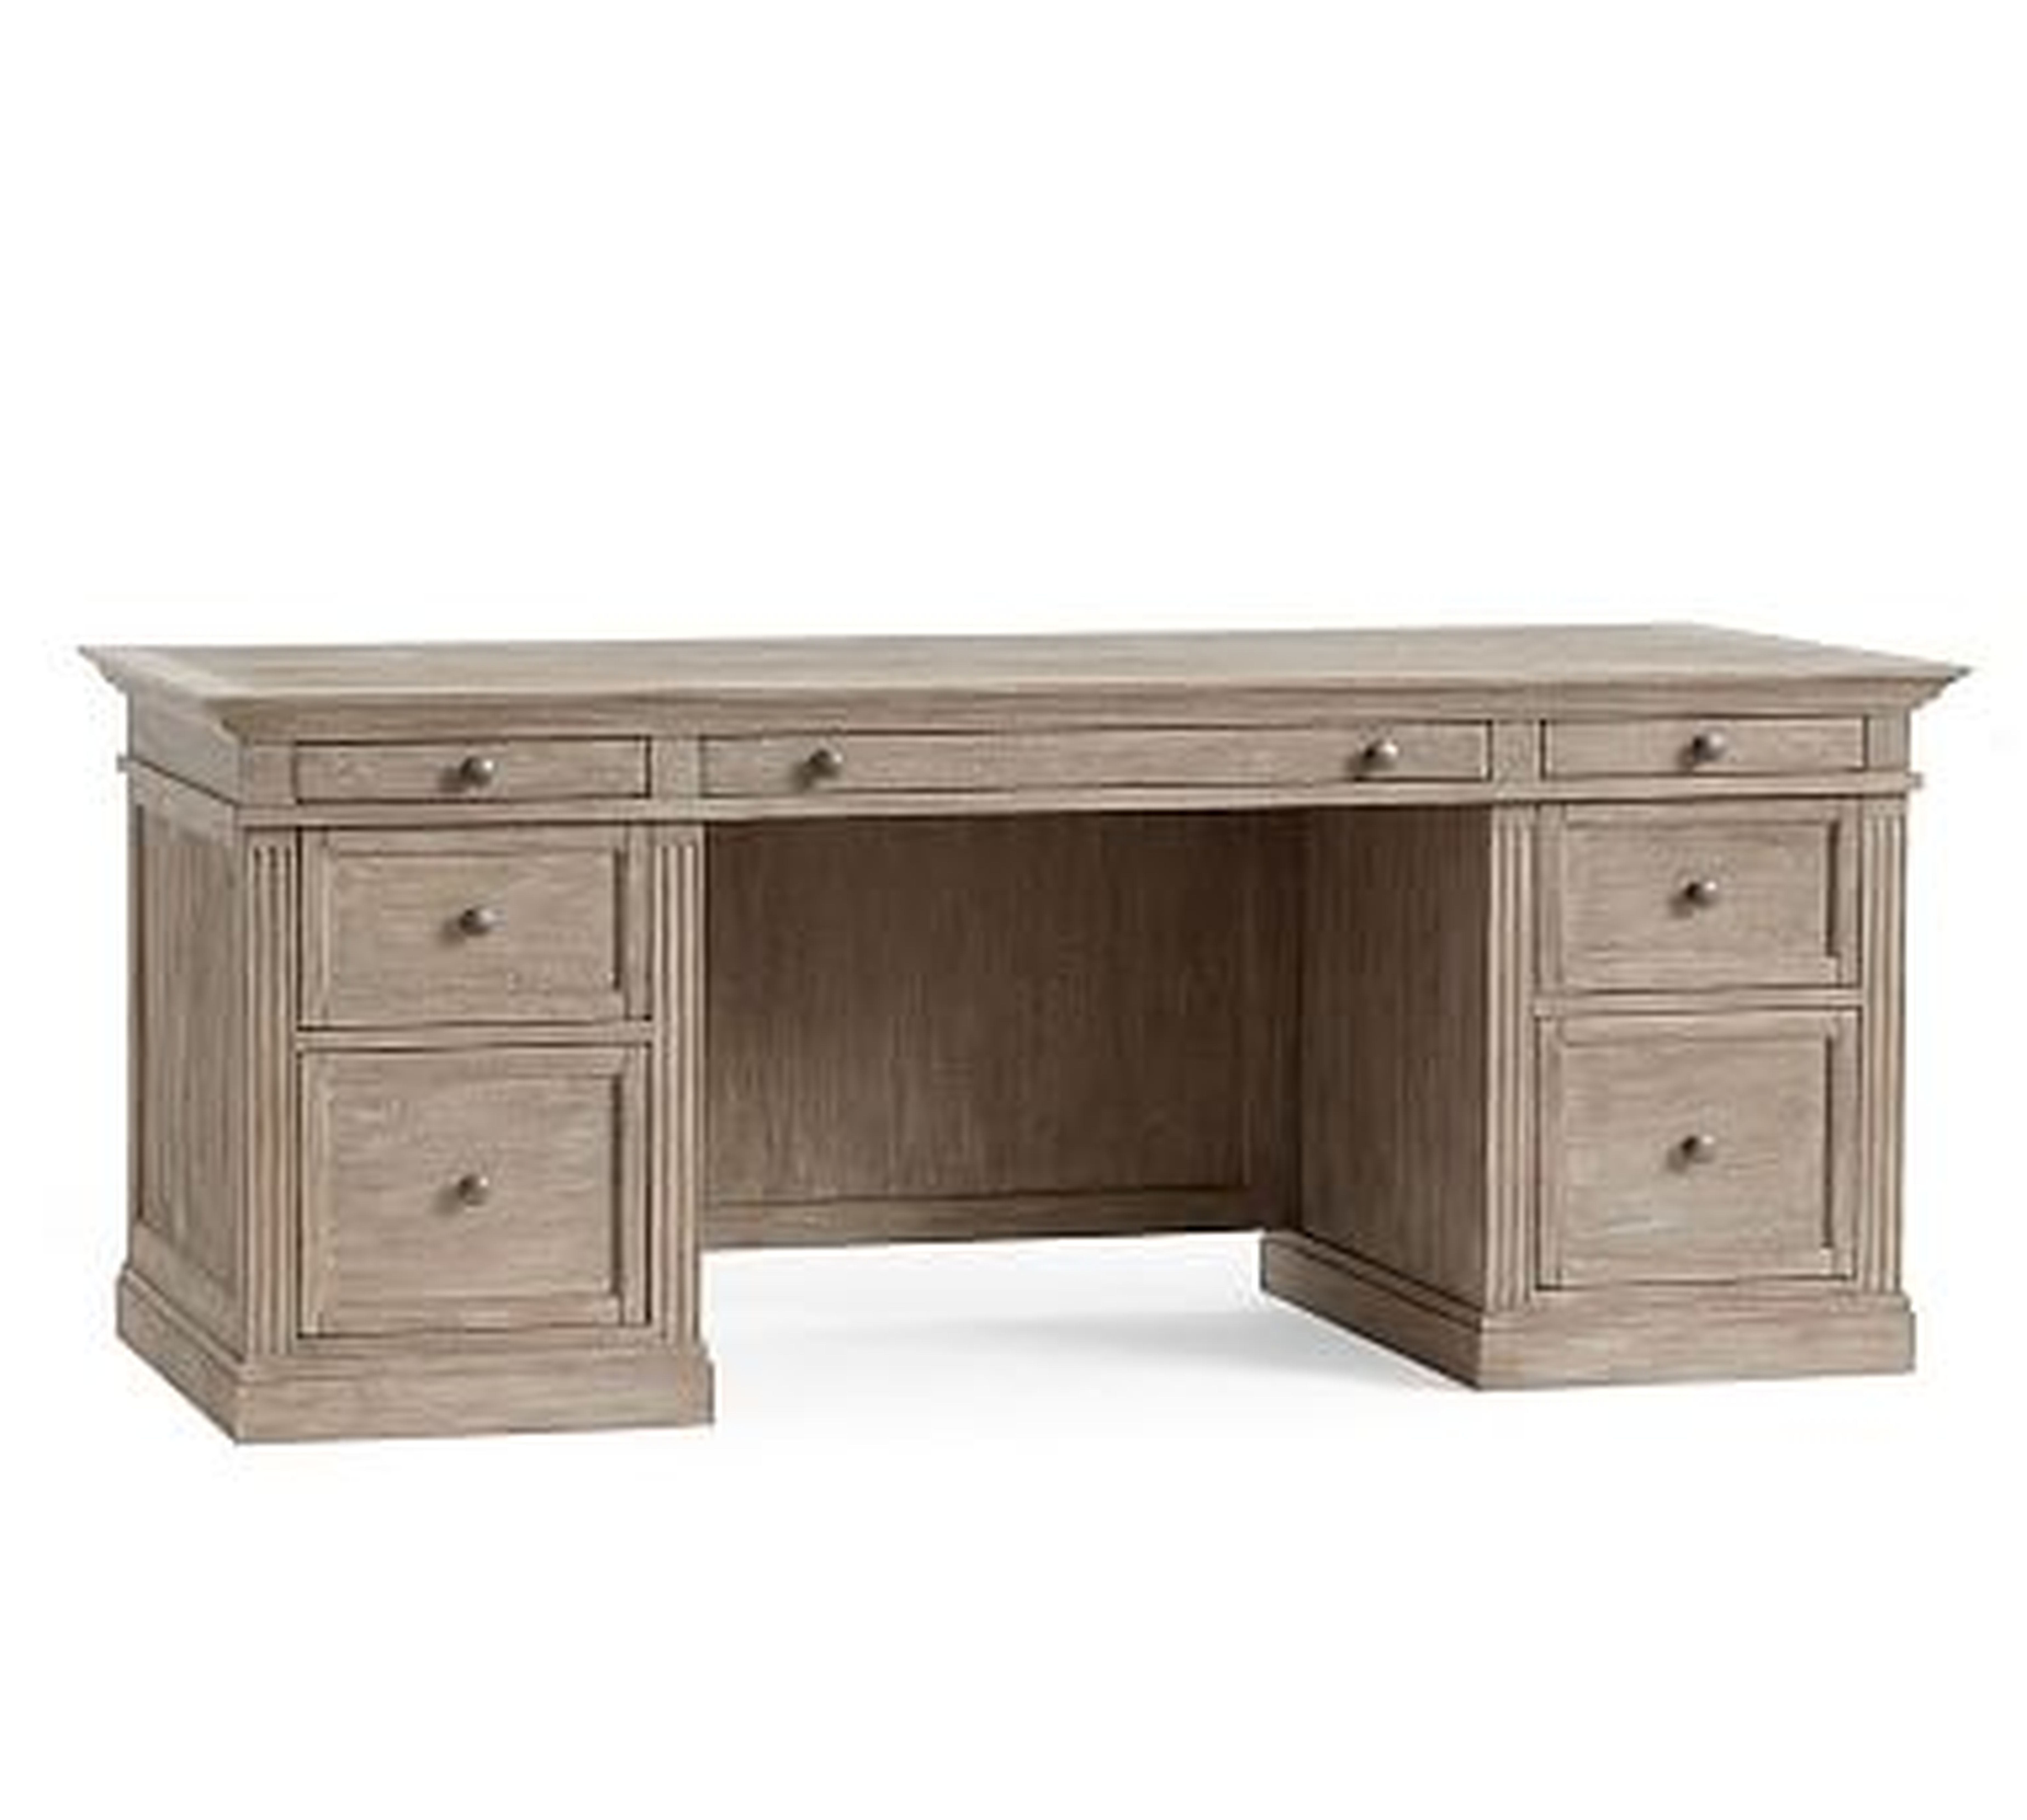 Livingston 75" Executive Desk with Drawers, Gray Wash - Pottery Barn